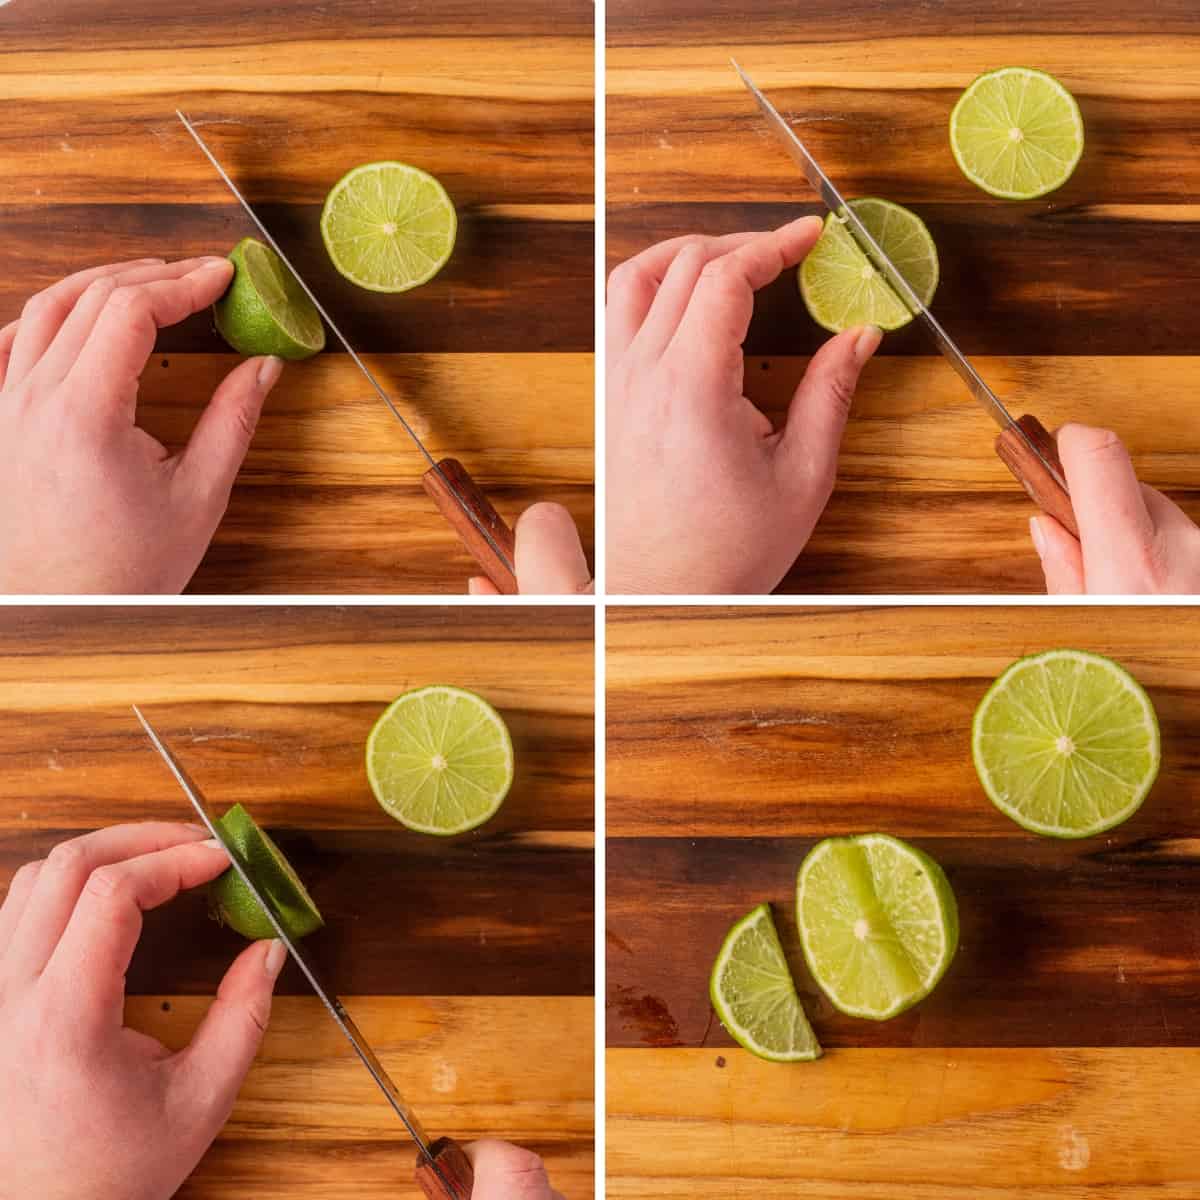 A hand and knife slicing limes.